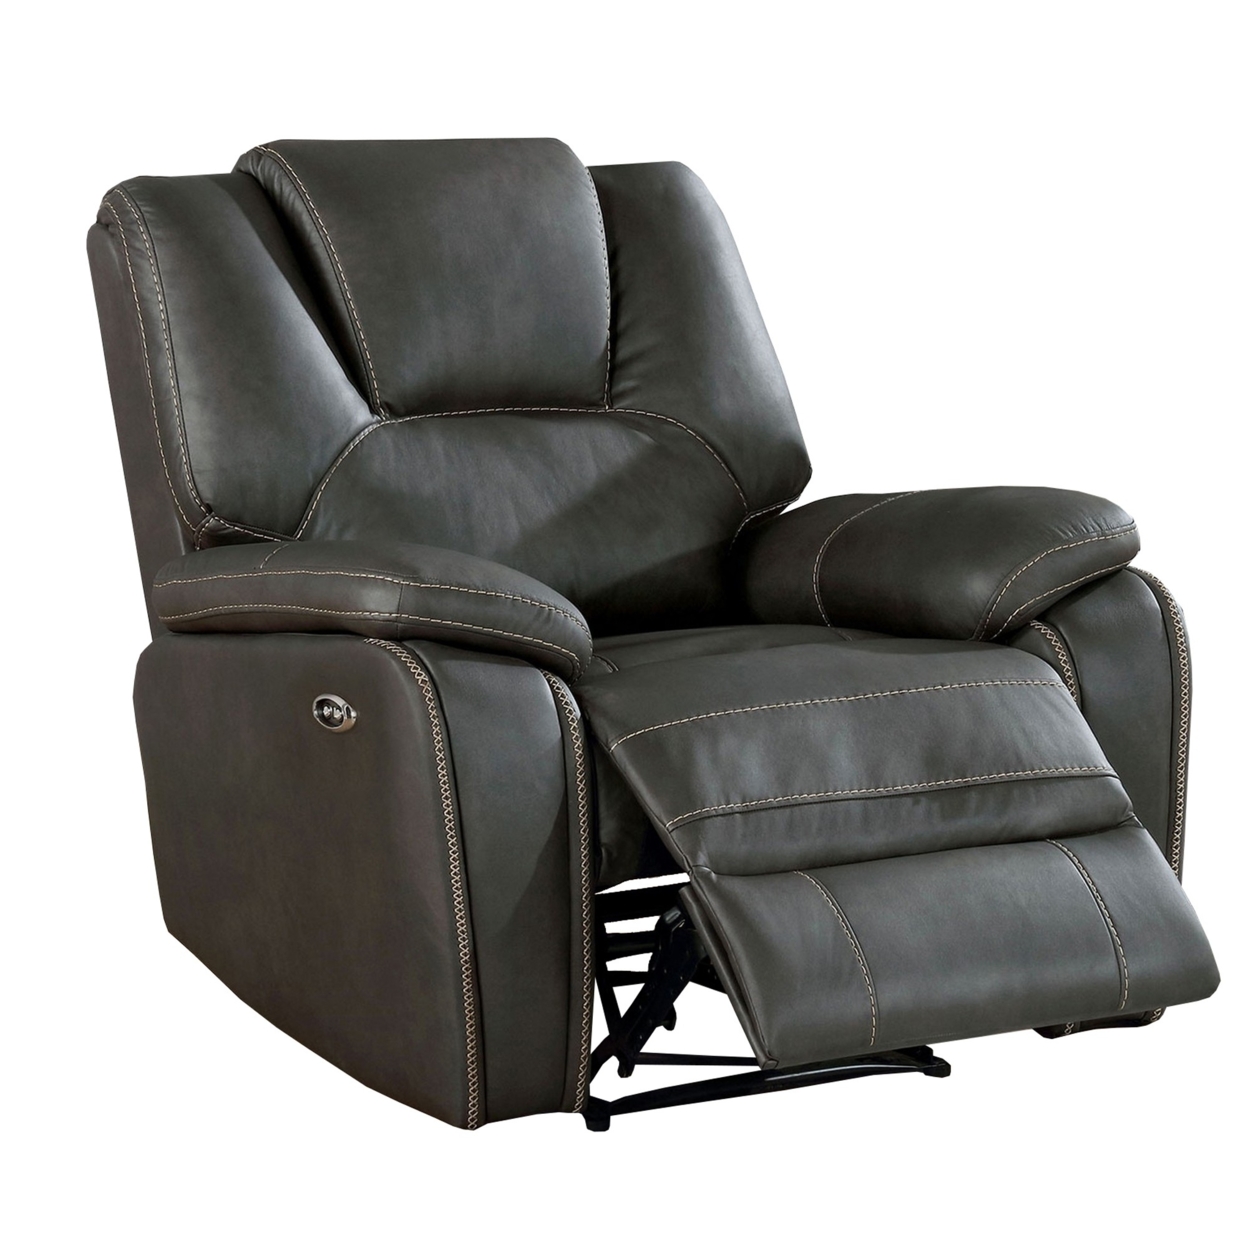 Leatherette Power Recliner With Pillow Top Arms, Dark Gray- Saltoro Sherpi